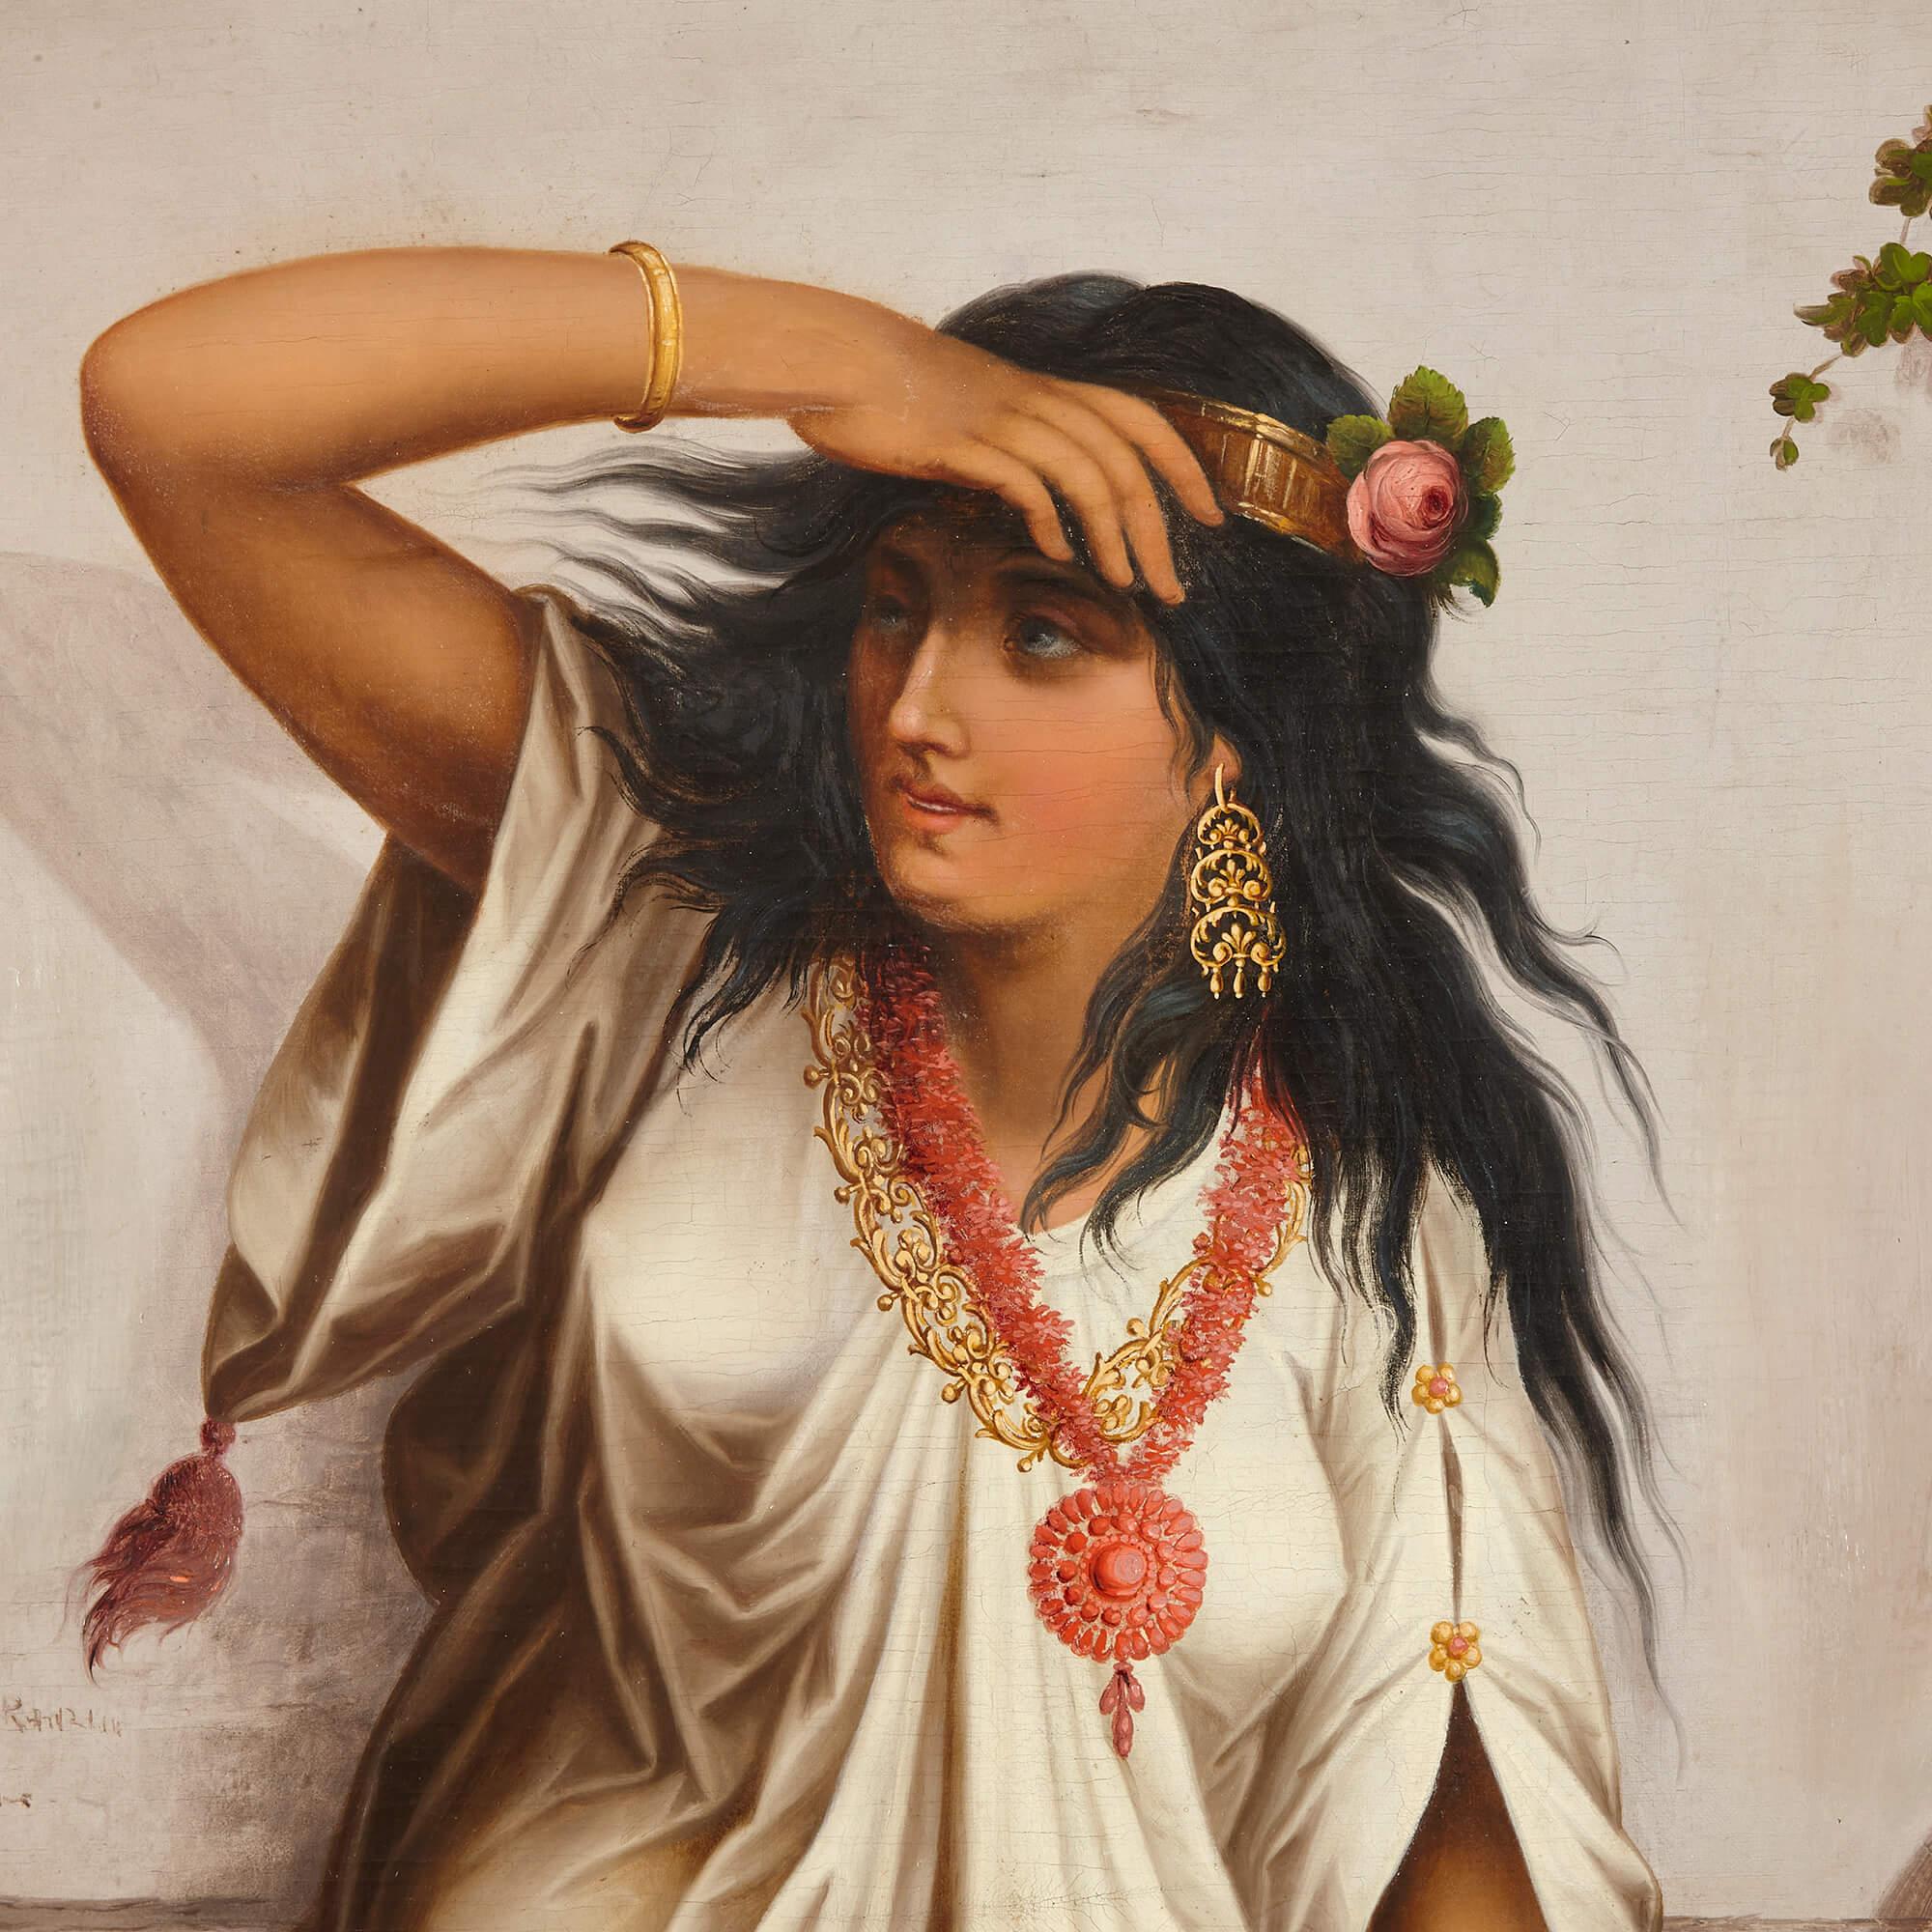 Late 19th Century antique Orientalist oil painting of a young woman - Romantic Painting by Stefan Bakalowicz